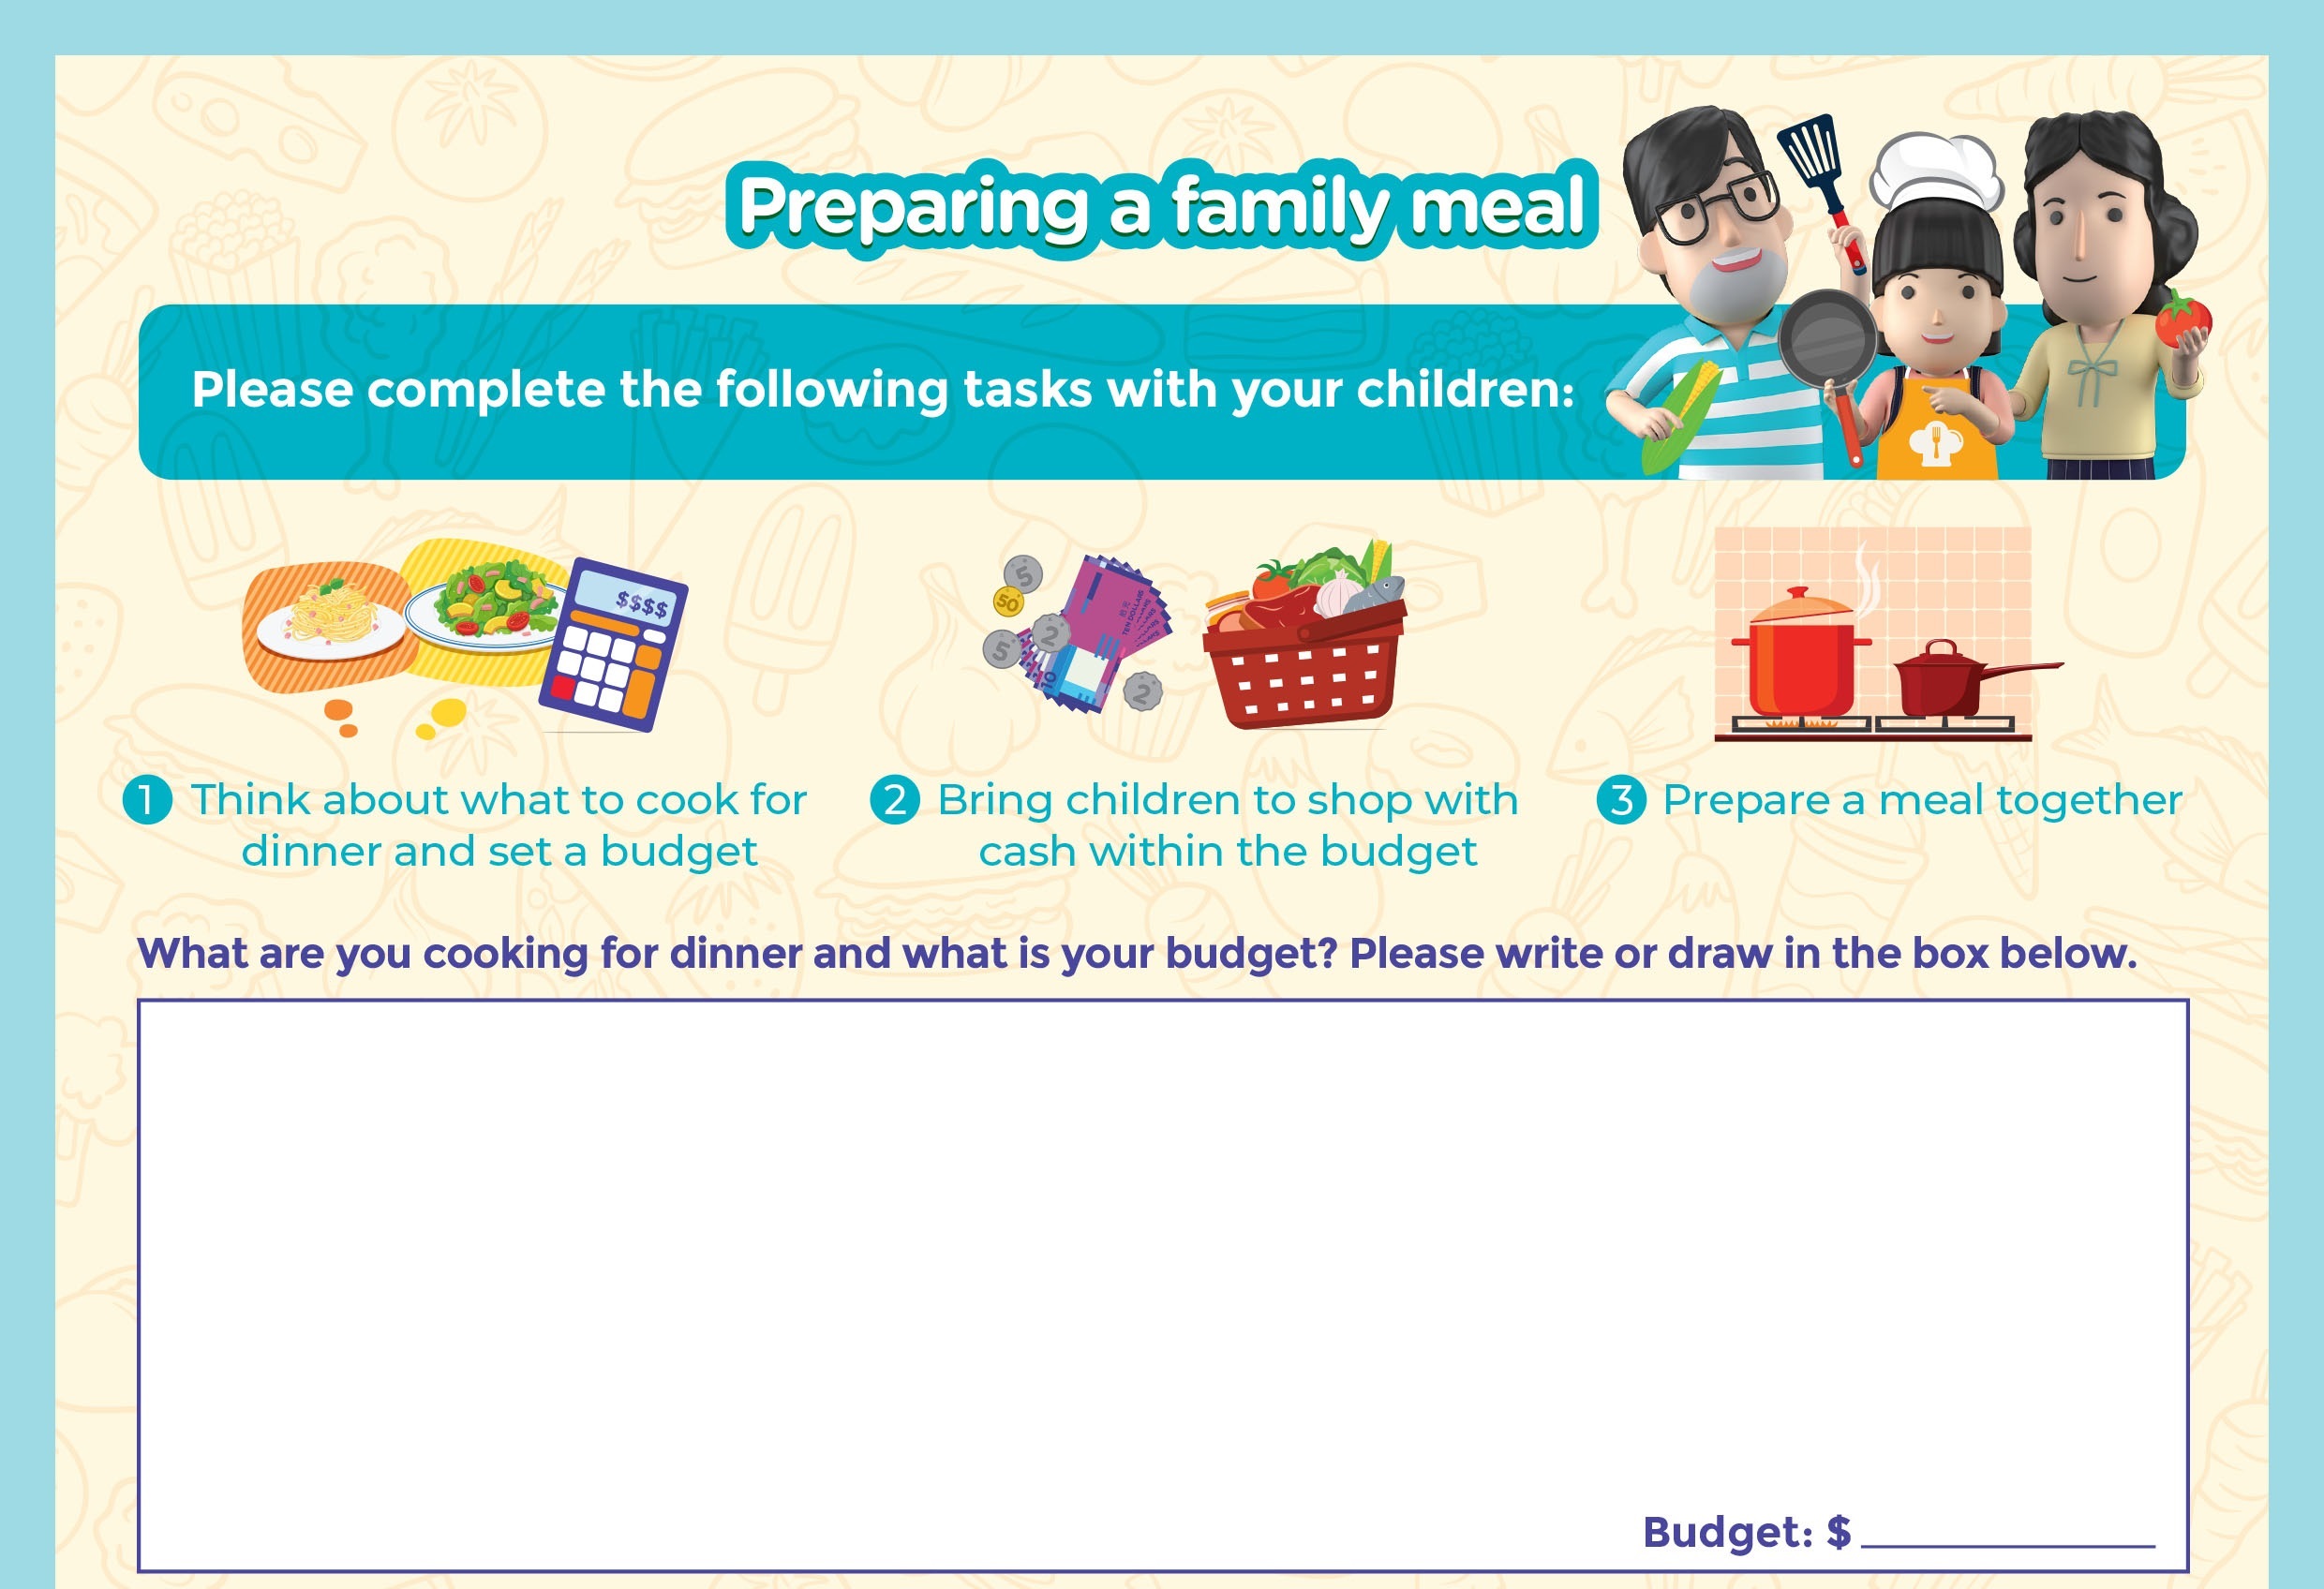 Activity: Preparing a family meal